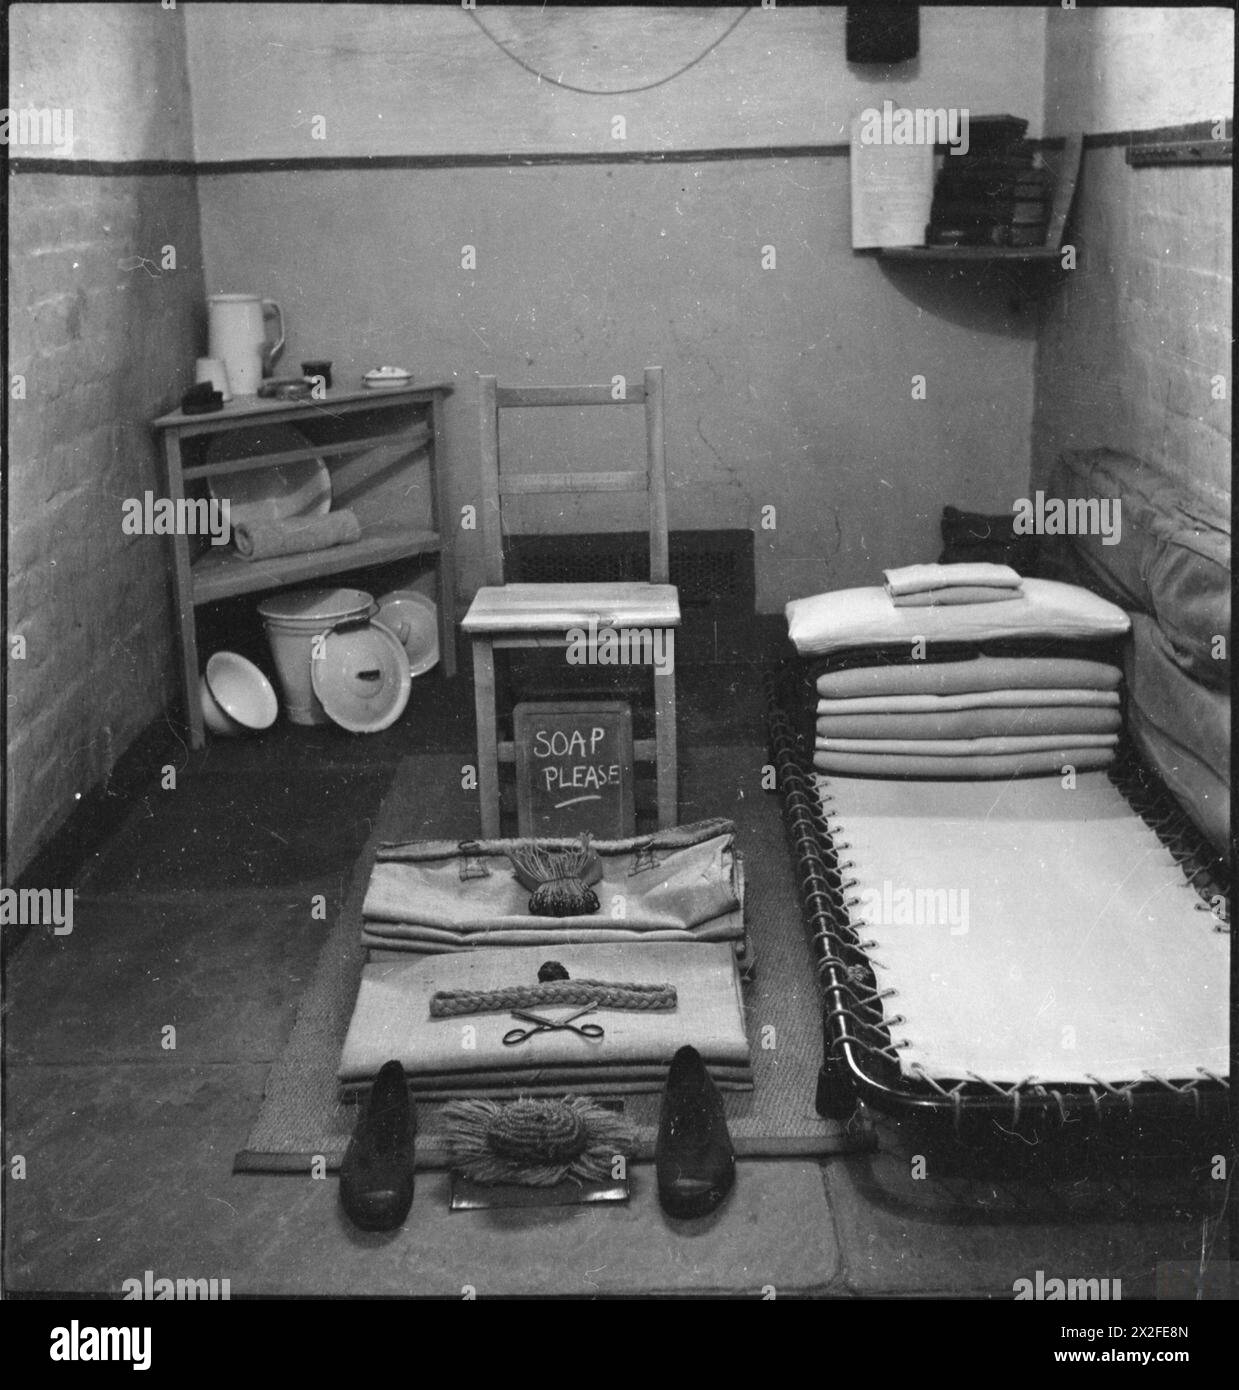 WAKEFIELD TRAINING PRISON AND CAMP: EVERYDAY LIFE IN A BRITISH PRISON, WAKEFIELD, YORKSHIRE, ENGLAND, 1944 - A view of an inmate's room at Wakefield Prison. Clearly visible are the bed, a chair, several small shelves, and slop bucket. The rest of the inmate's belongings, such as a pair of shoes and a comb, have been set out neatly, ready for inspection. Chalked on a small blackboard are the words 'soap please' Stock Photo